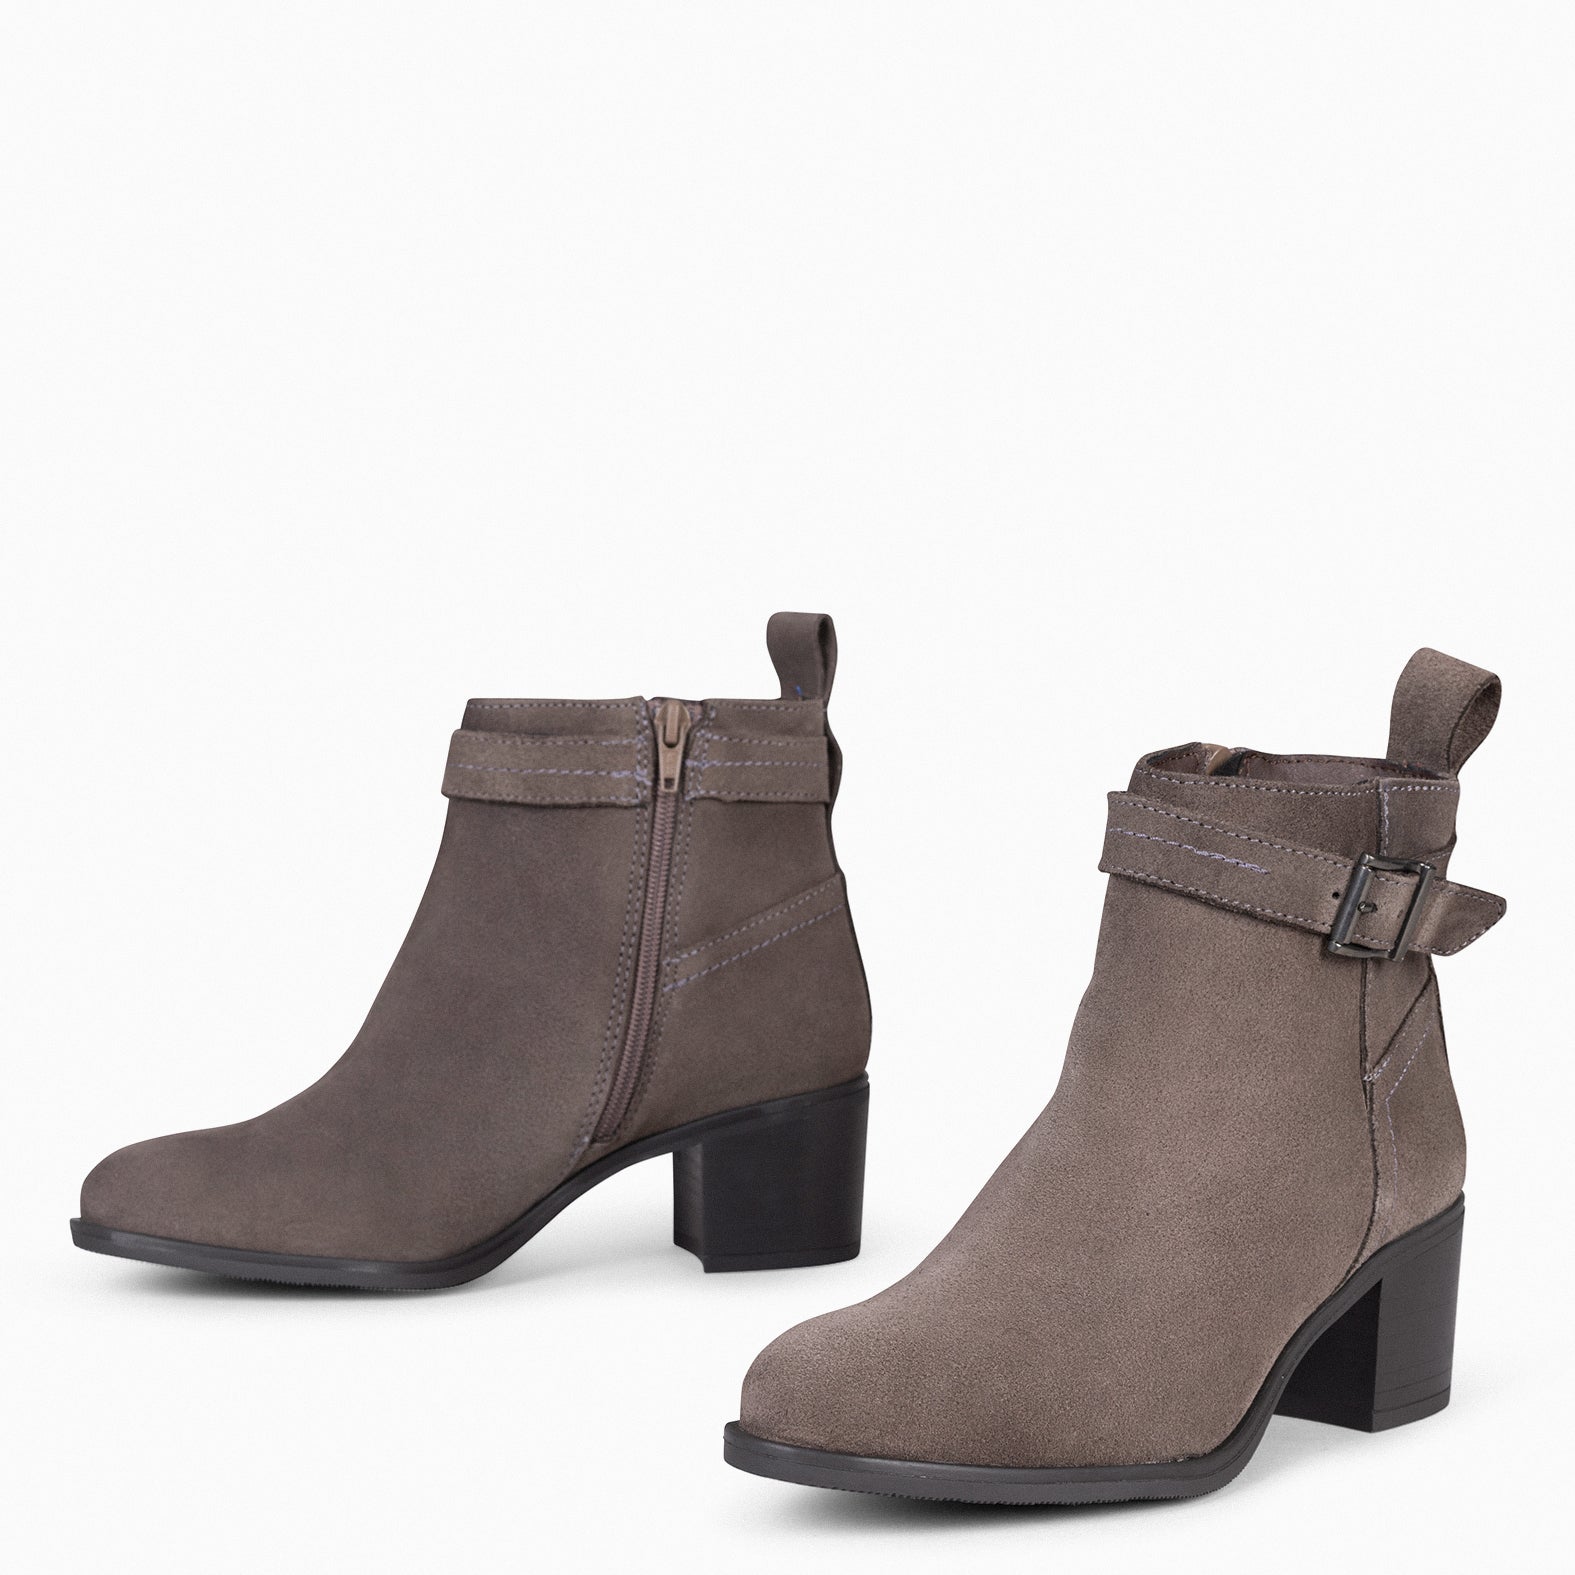 SEATTLE - TAUPE Women suede leather booties 